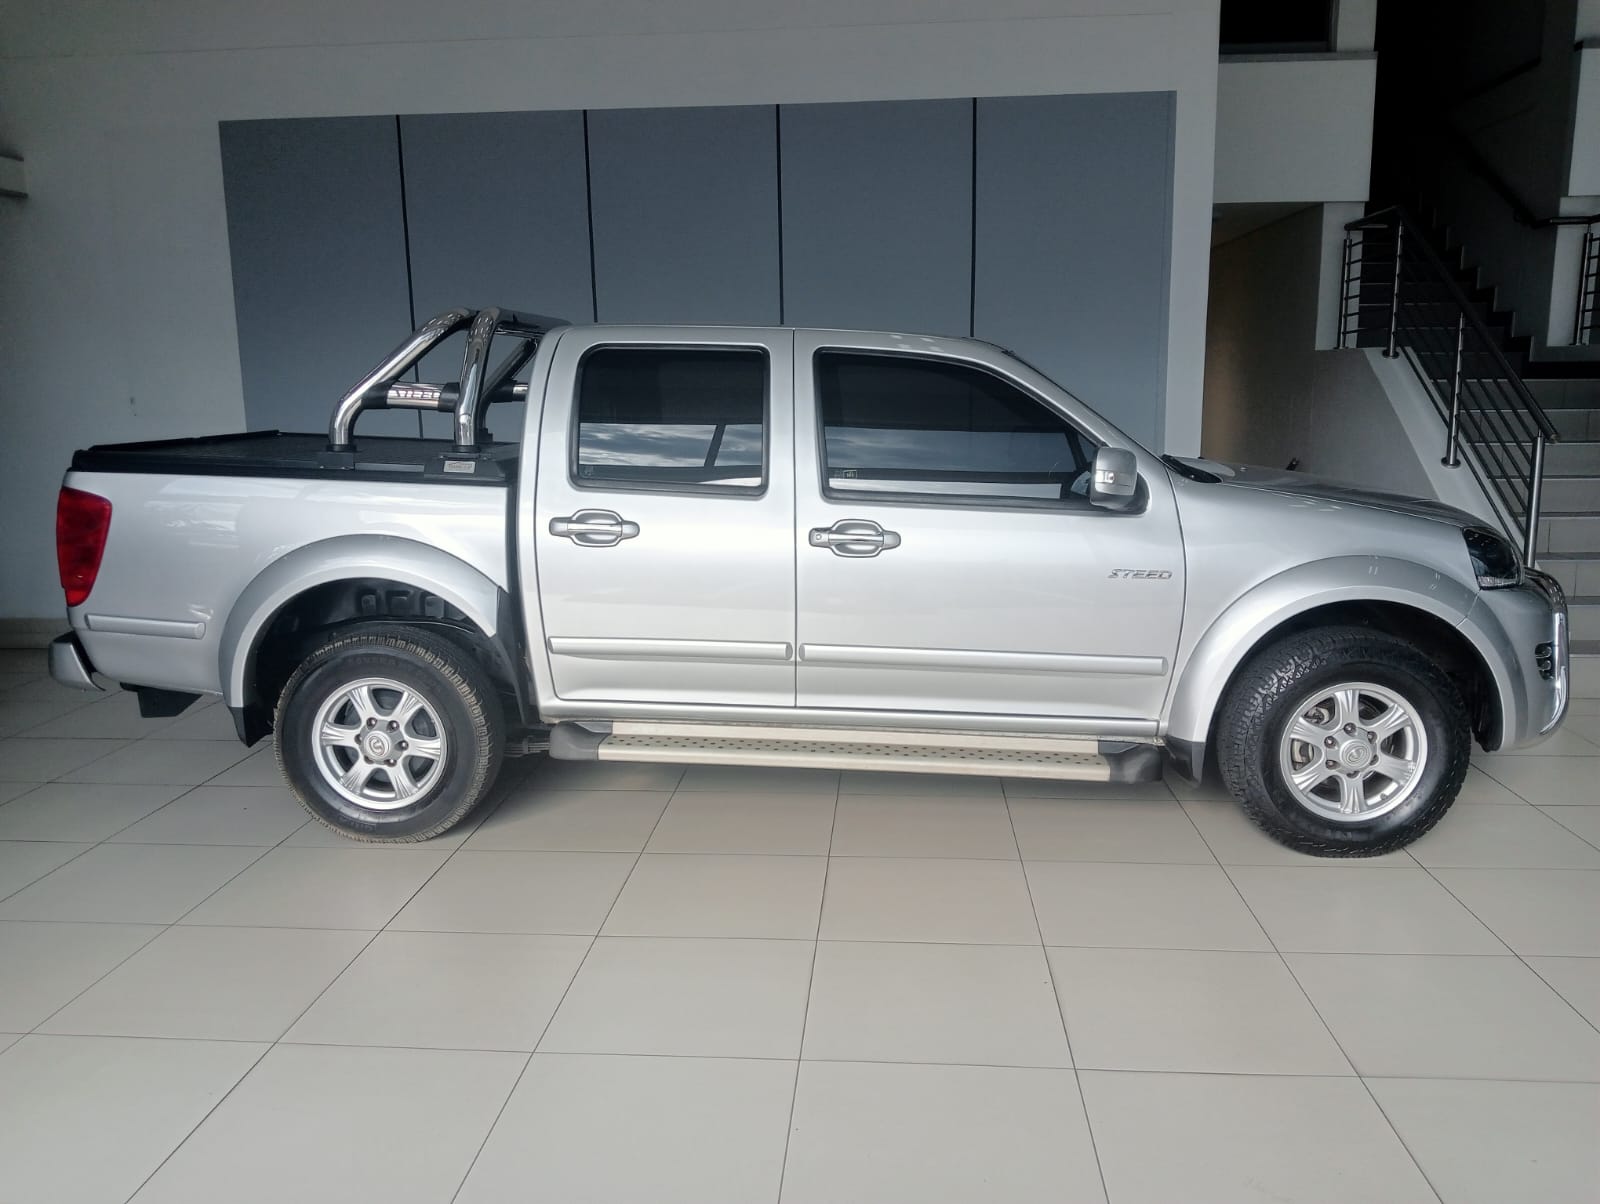 2018 GWM Steed 5E Double Cab  for sale - UH70660